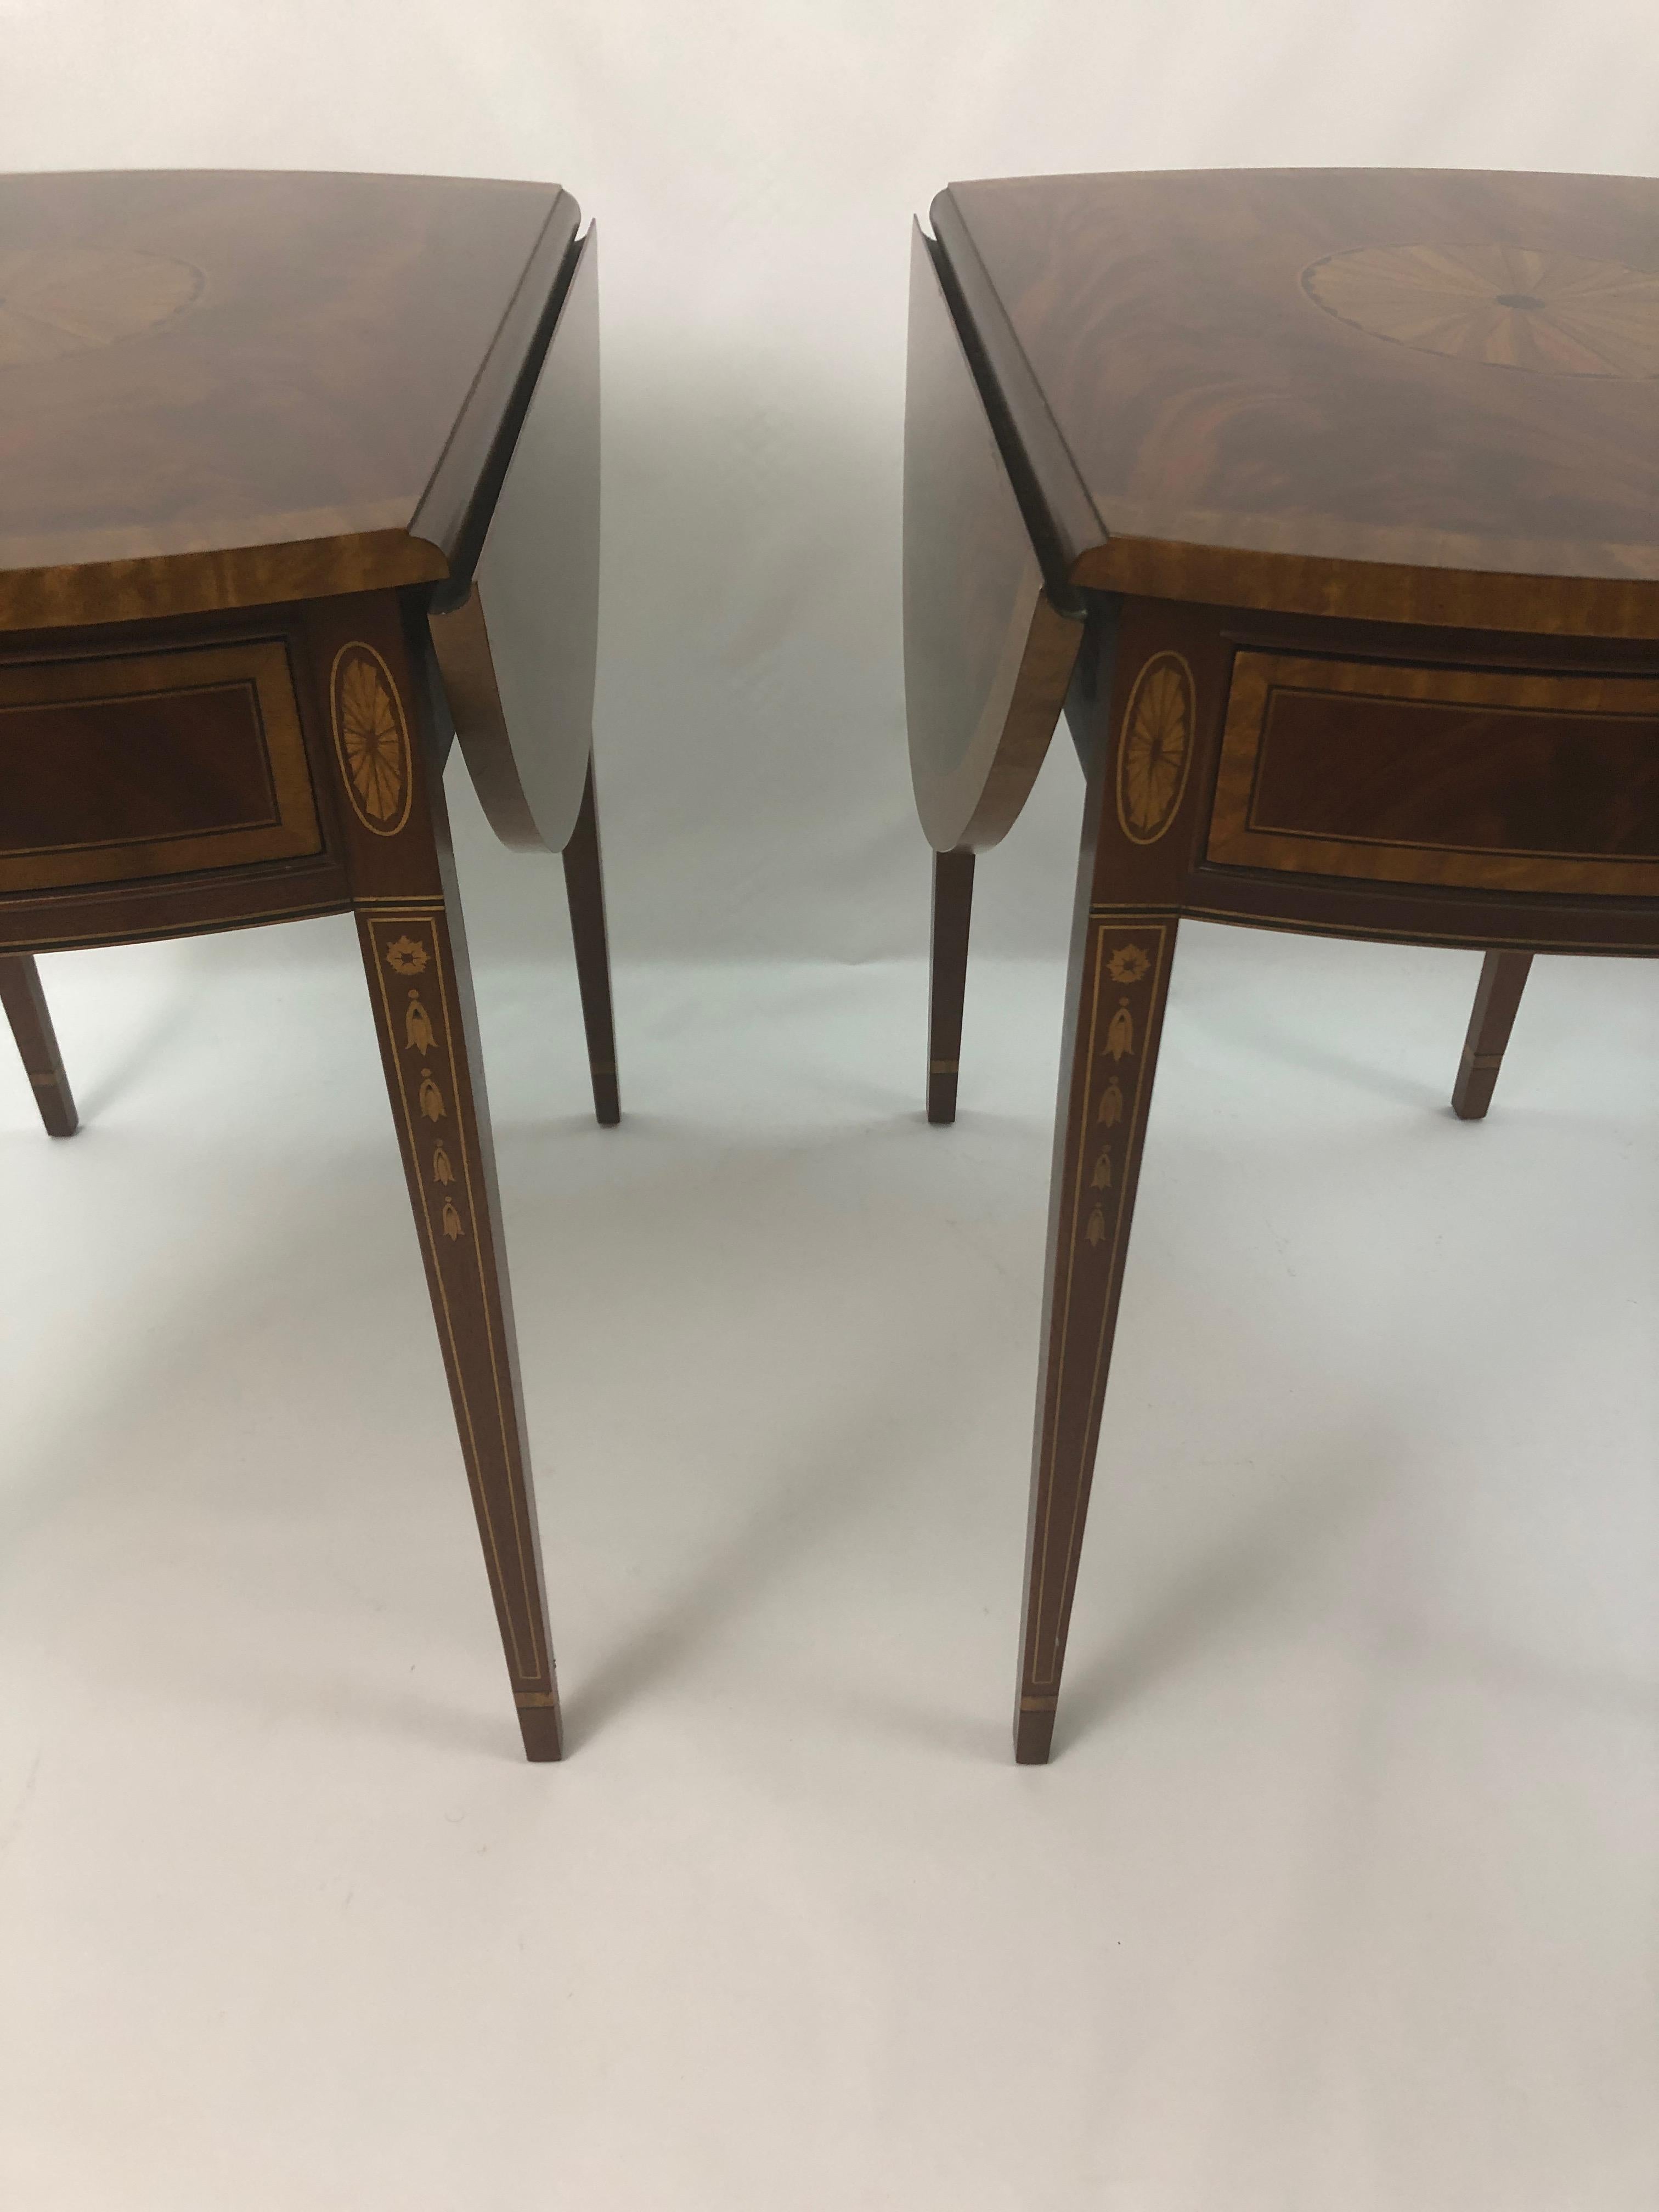 A stately pair of drop-leaf flame mahogany end tables by Councill that are rectangular with the leaves down and 21 W, then round with the leaves extended. Gorgeous mahogany with satinwood and ebony inlay having bell flower accents on the tapered